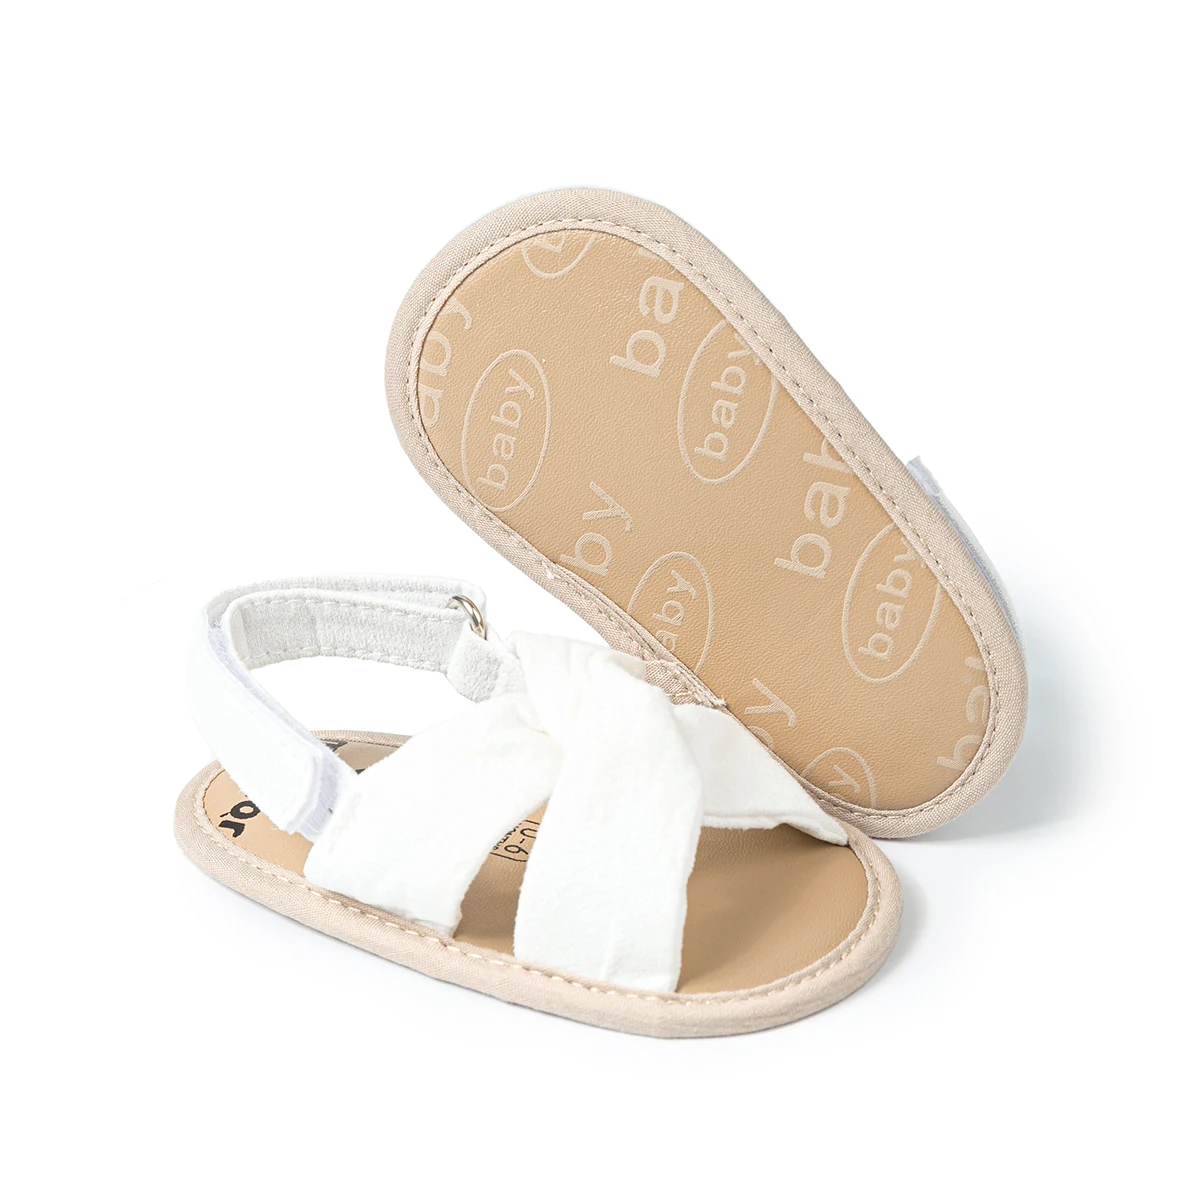 Hot Selling Cotton Summer Anti-Slip Sole Baby Sandal & Slippers Shoes For Babies